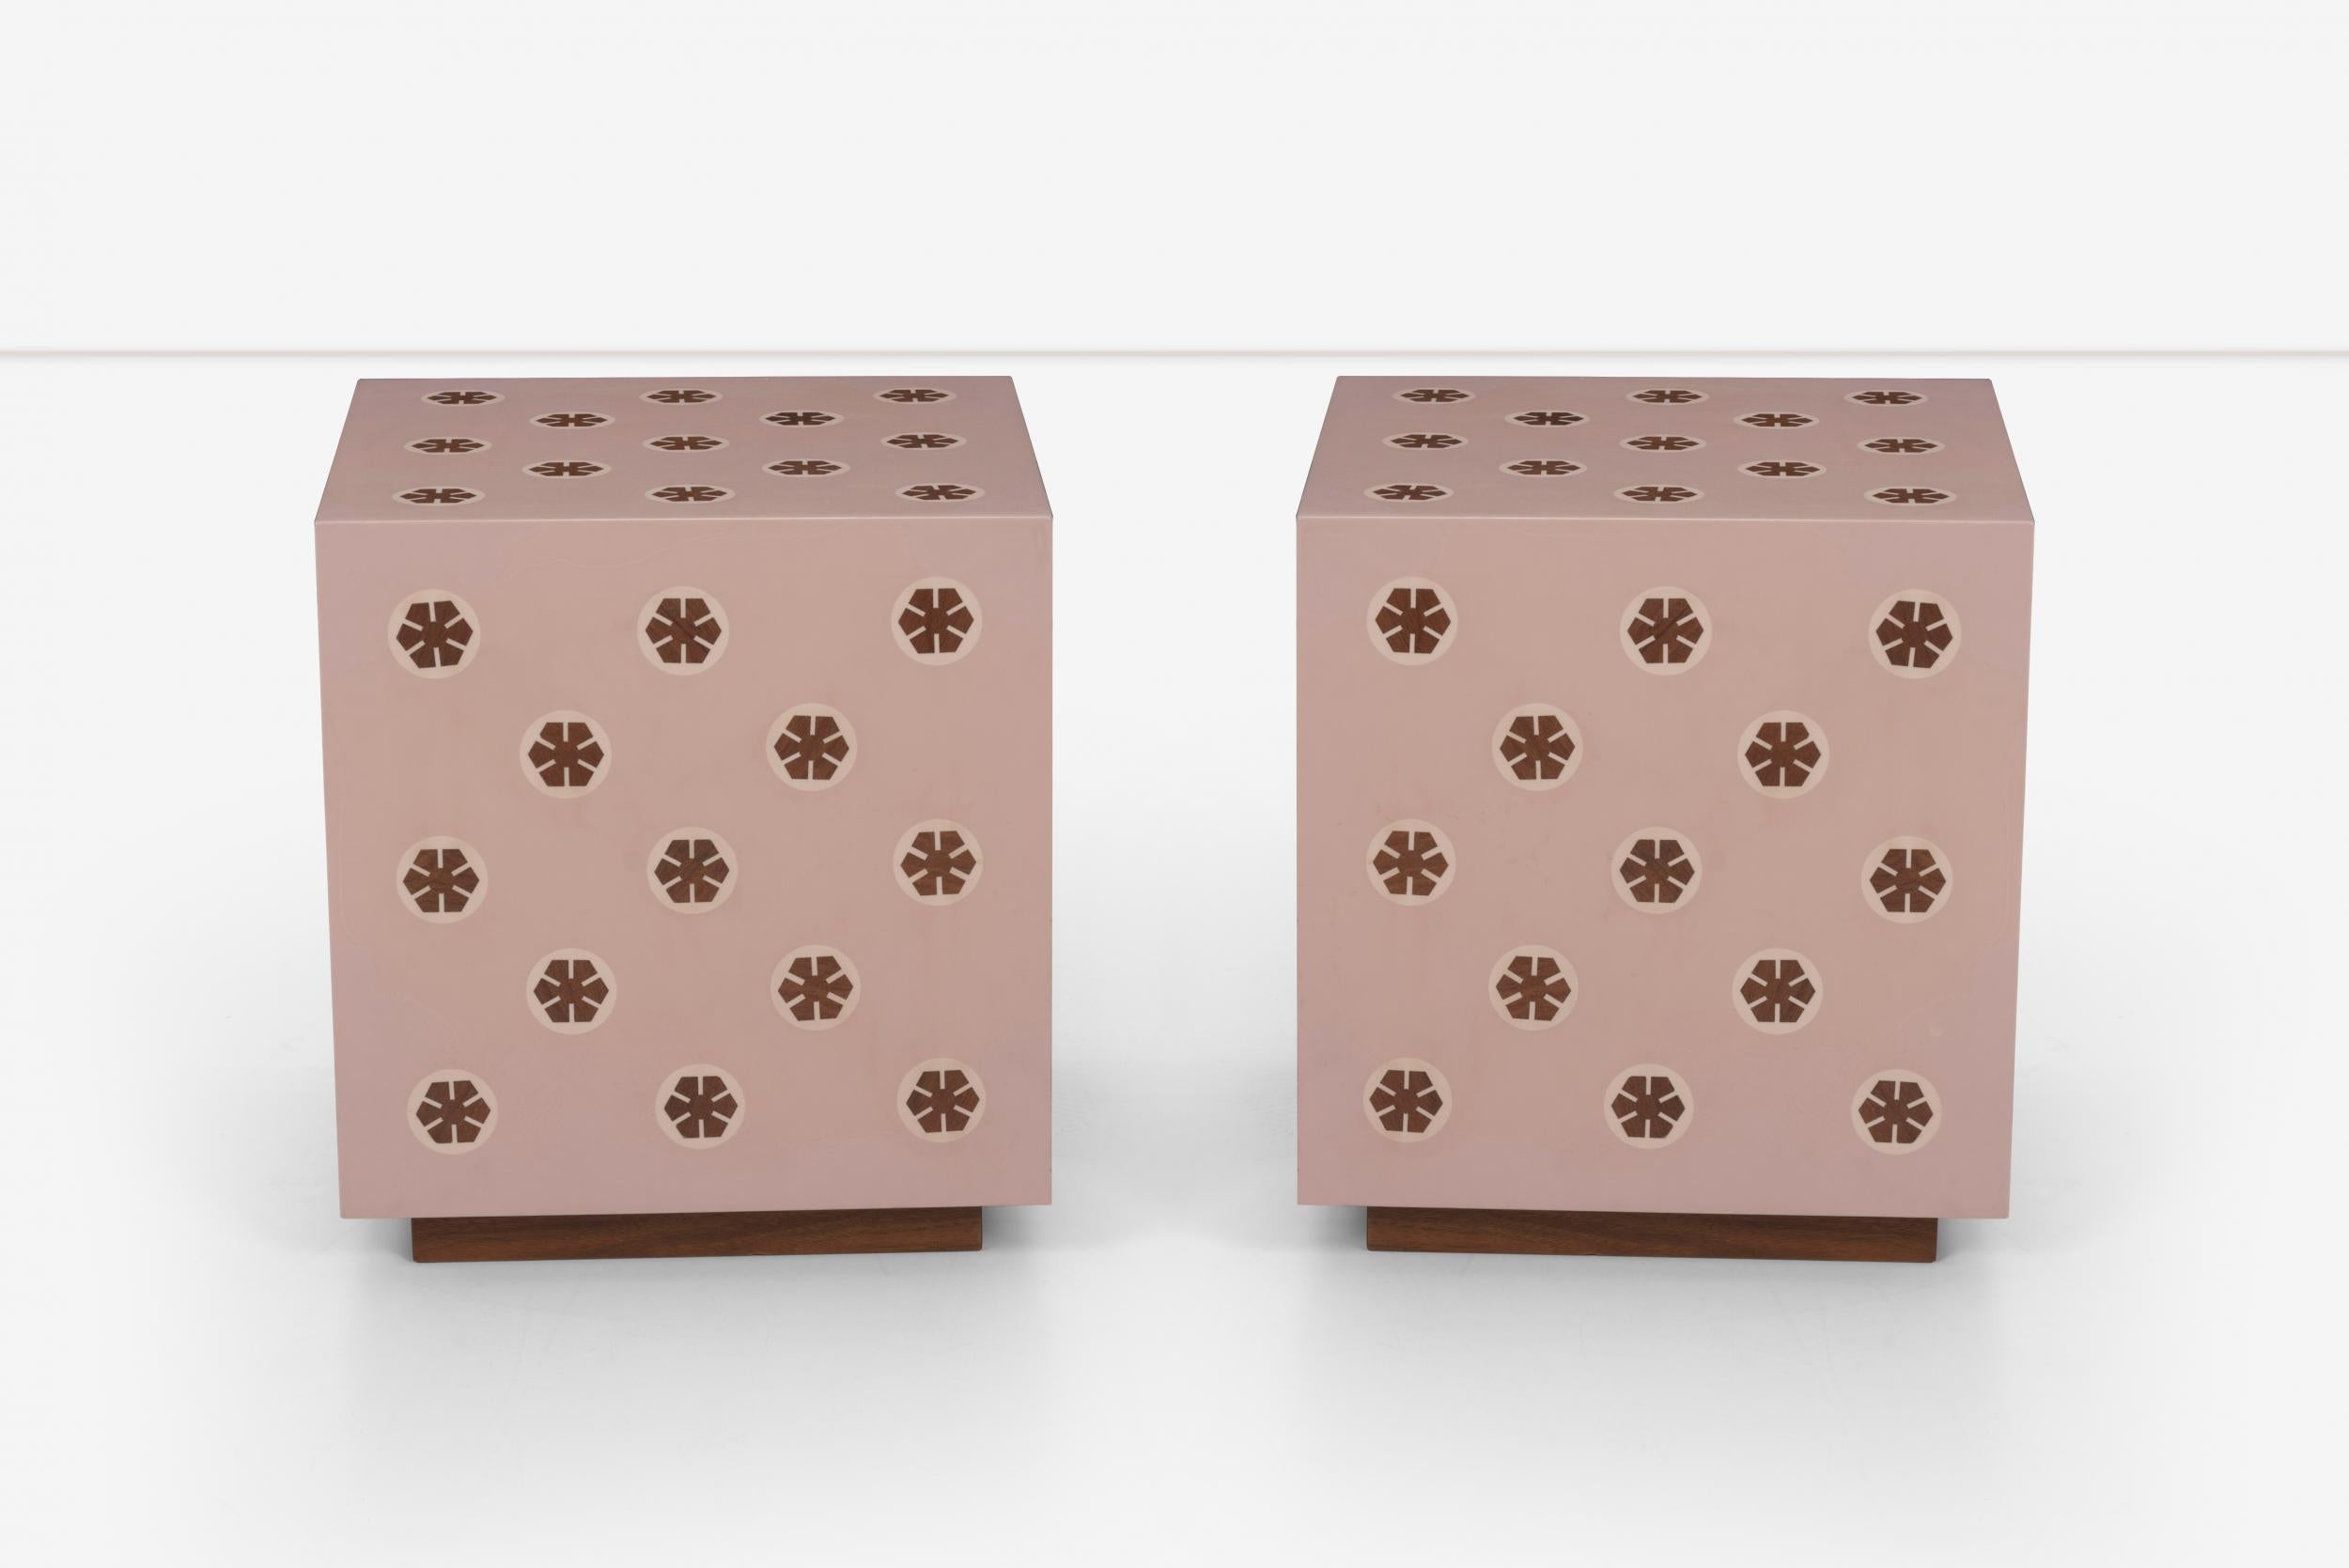 Pair of end tables Dunbar Wormley, Dunbar style, Inlaid walnut geometric designs with resin coated surface.